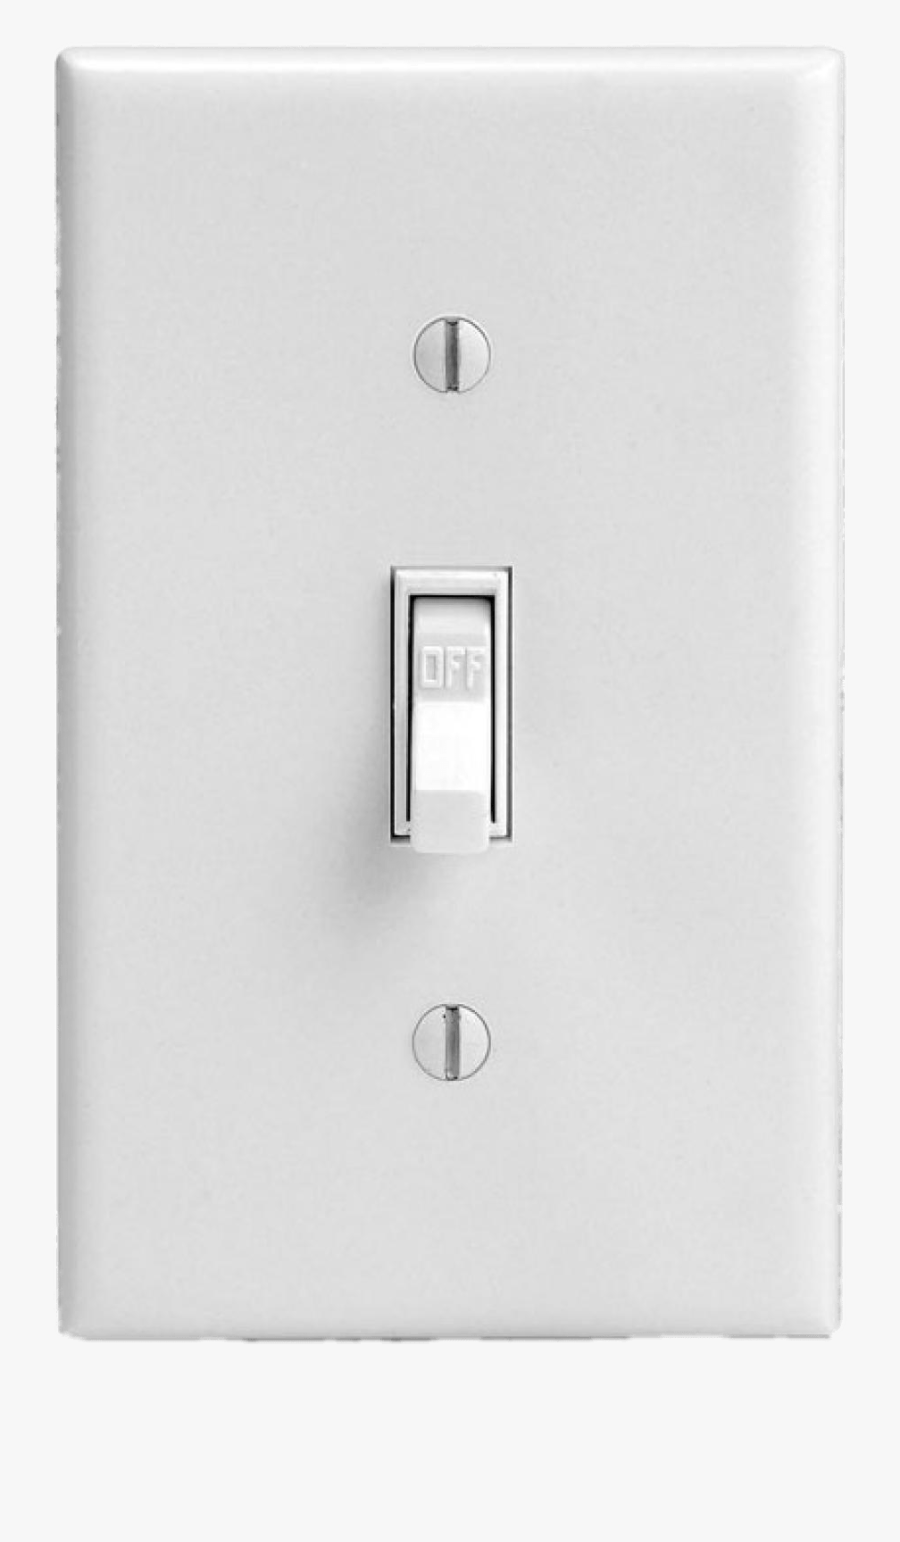 Light Switch Old Fashioned - Light Switch, Transparent Clipart